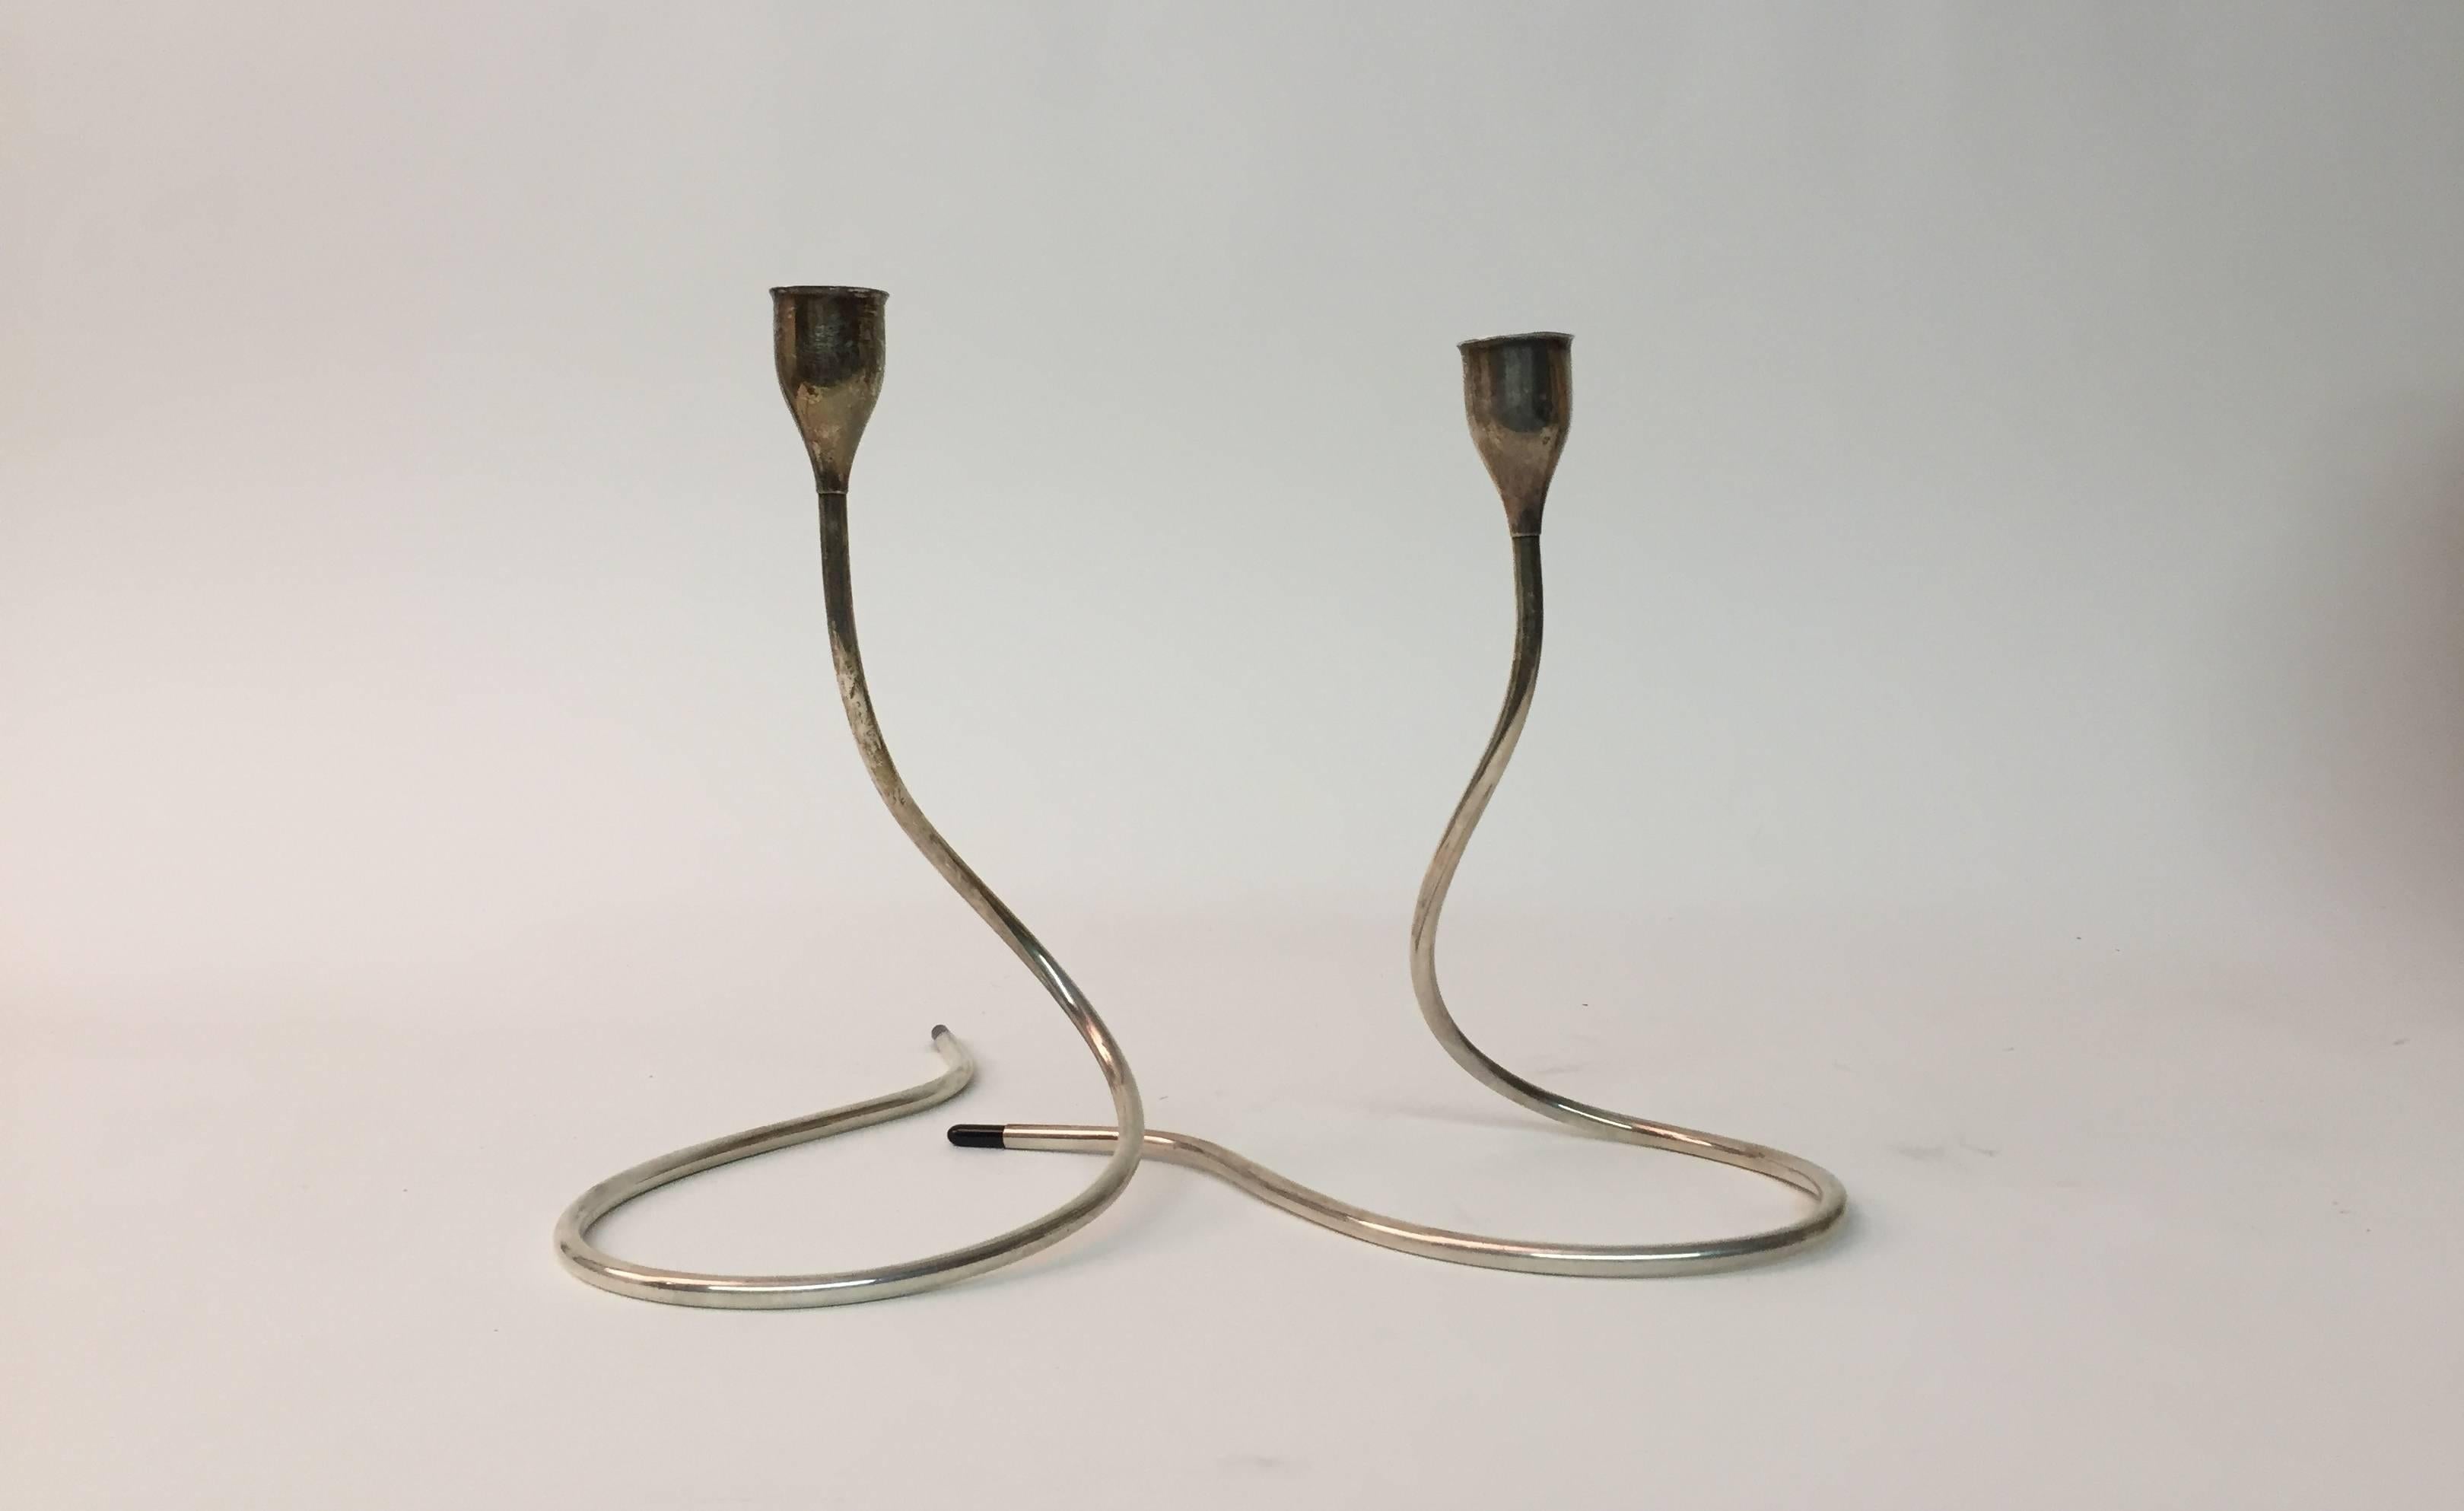 Wonderful pair of sterling silver candlesticks designed by Marion Anderson Noyes for Towle. Black plastic tipped ends. They measure individually 8.75